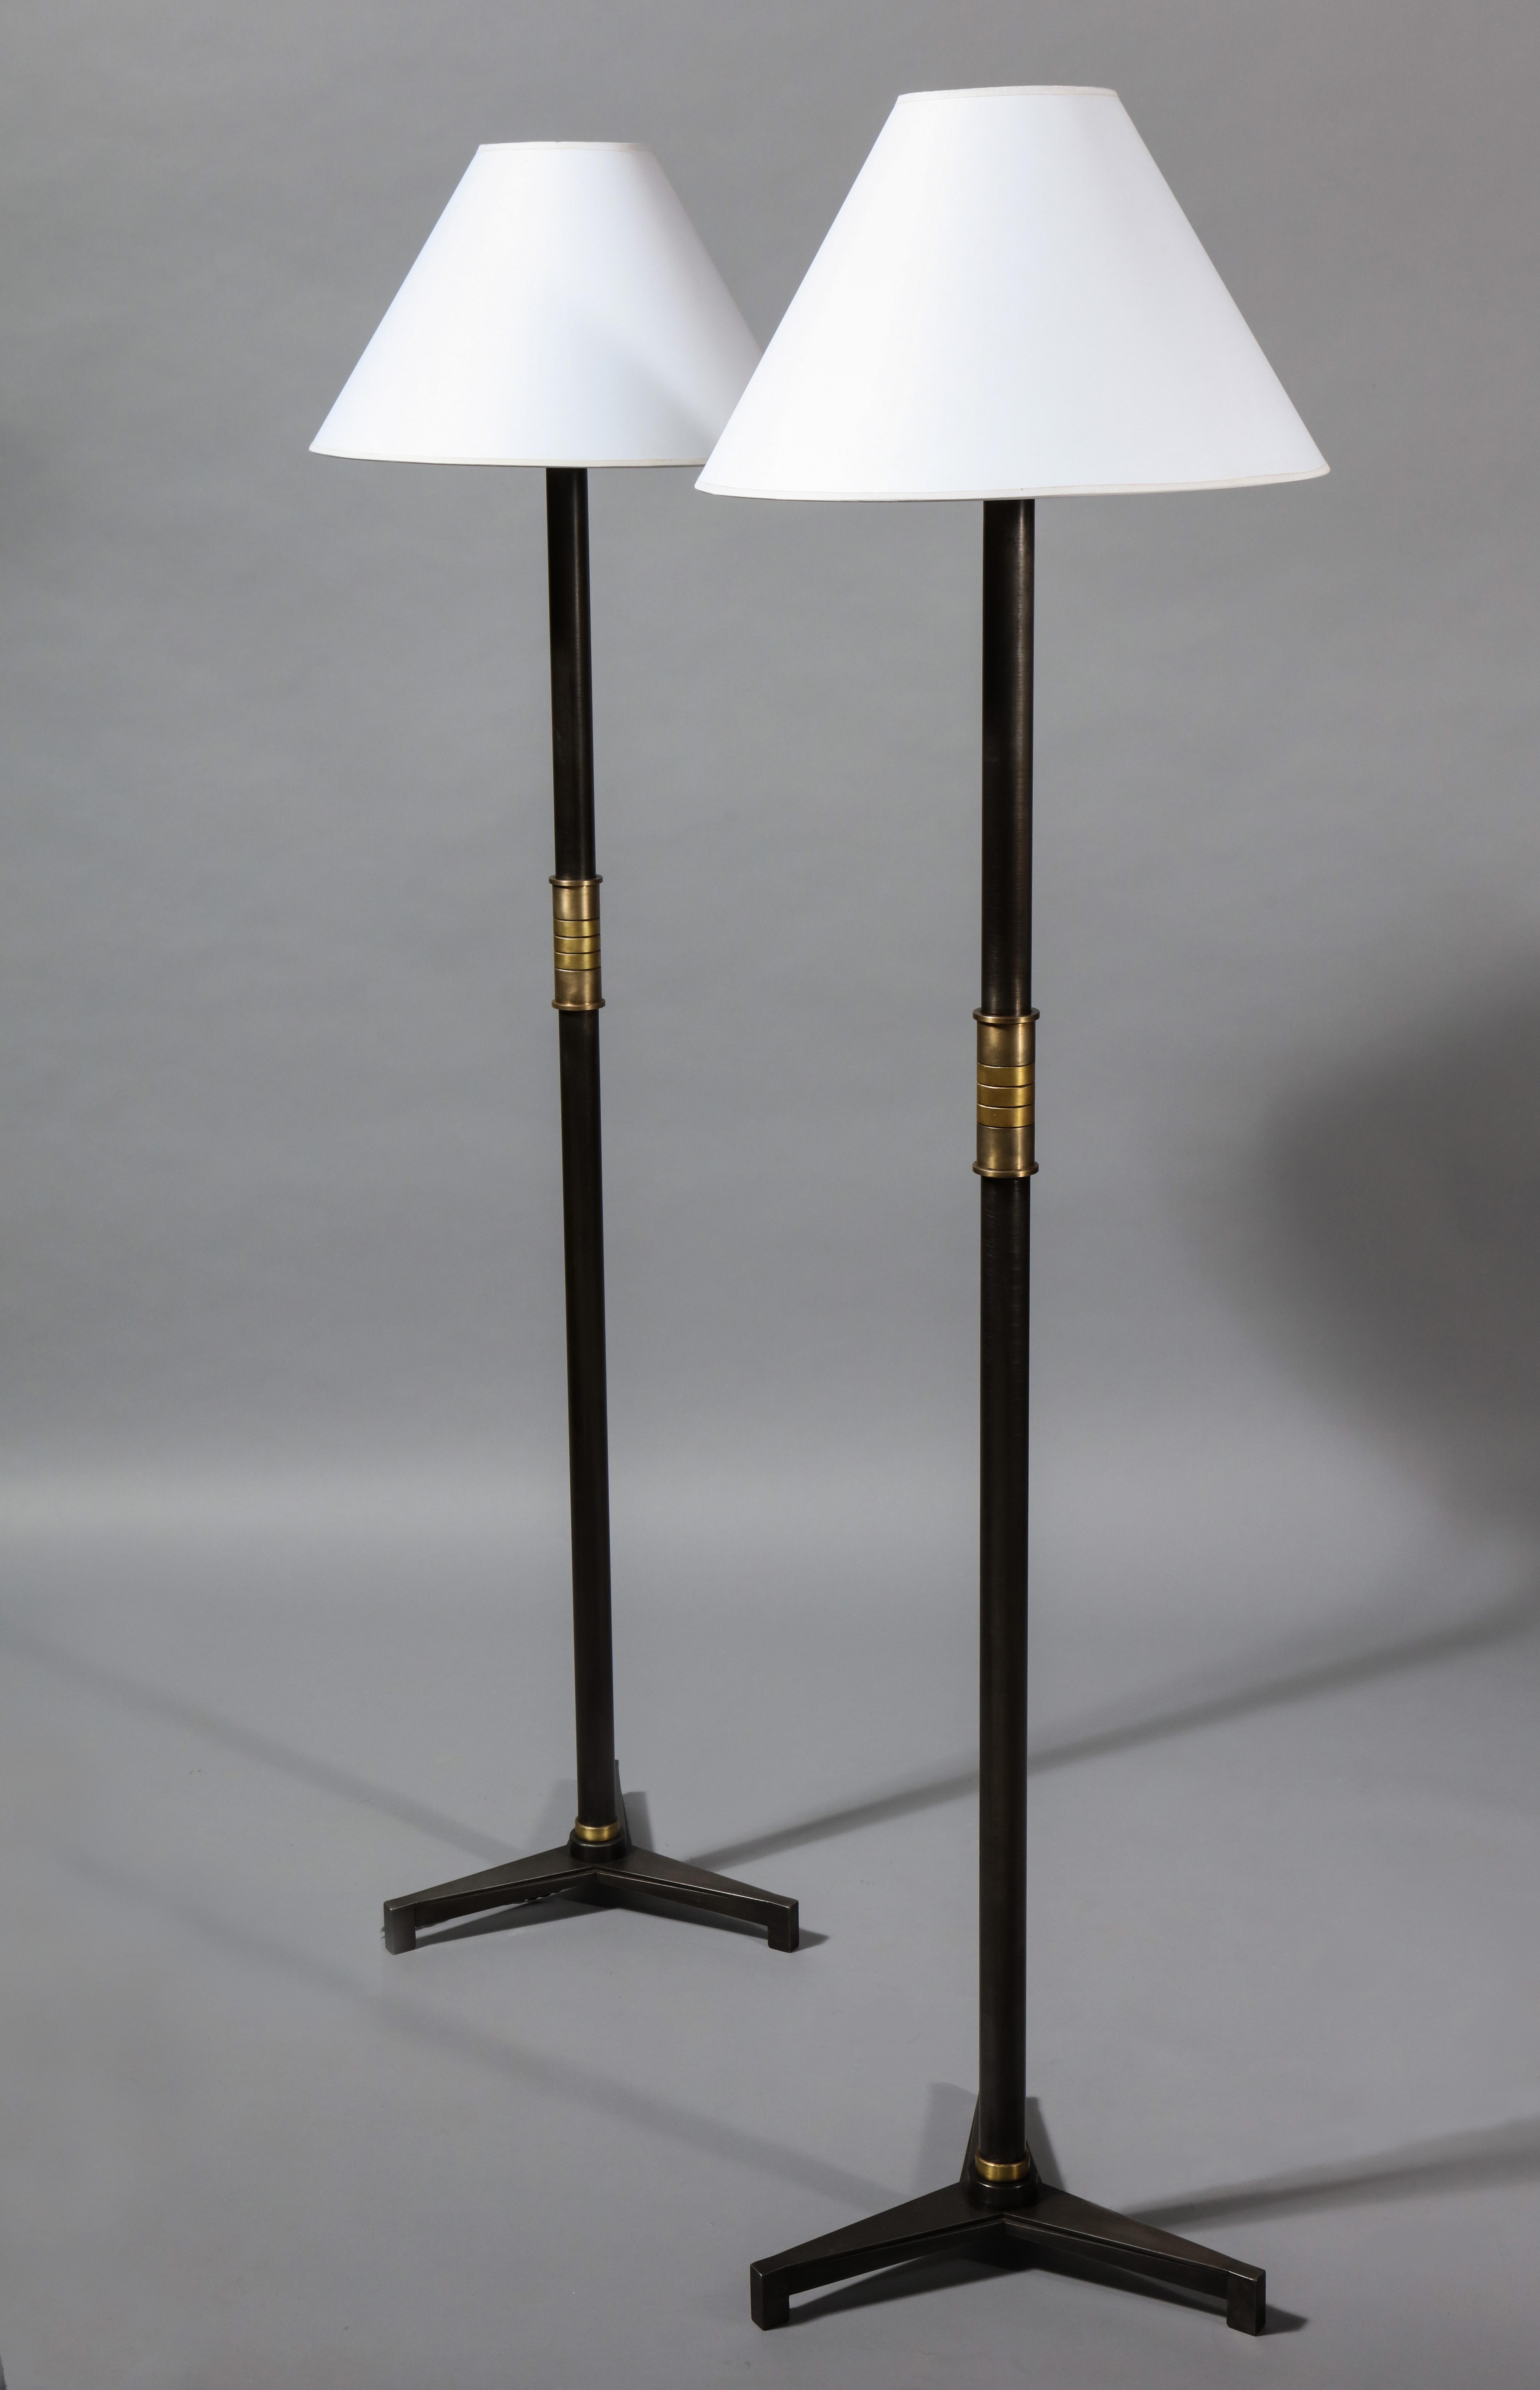 A floor lamp with a tri foot base featuring tapered fluting which resonates in the art deco movement. The hilt is realized in a series of subtly contrasting brass and bronze bands. This design is also inspired by the mid-century French Neoclassical